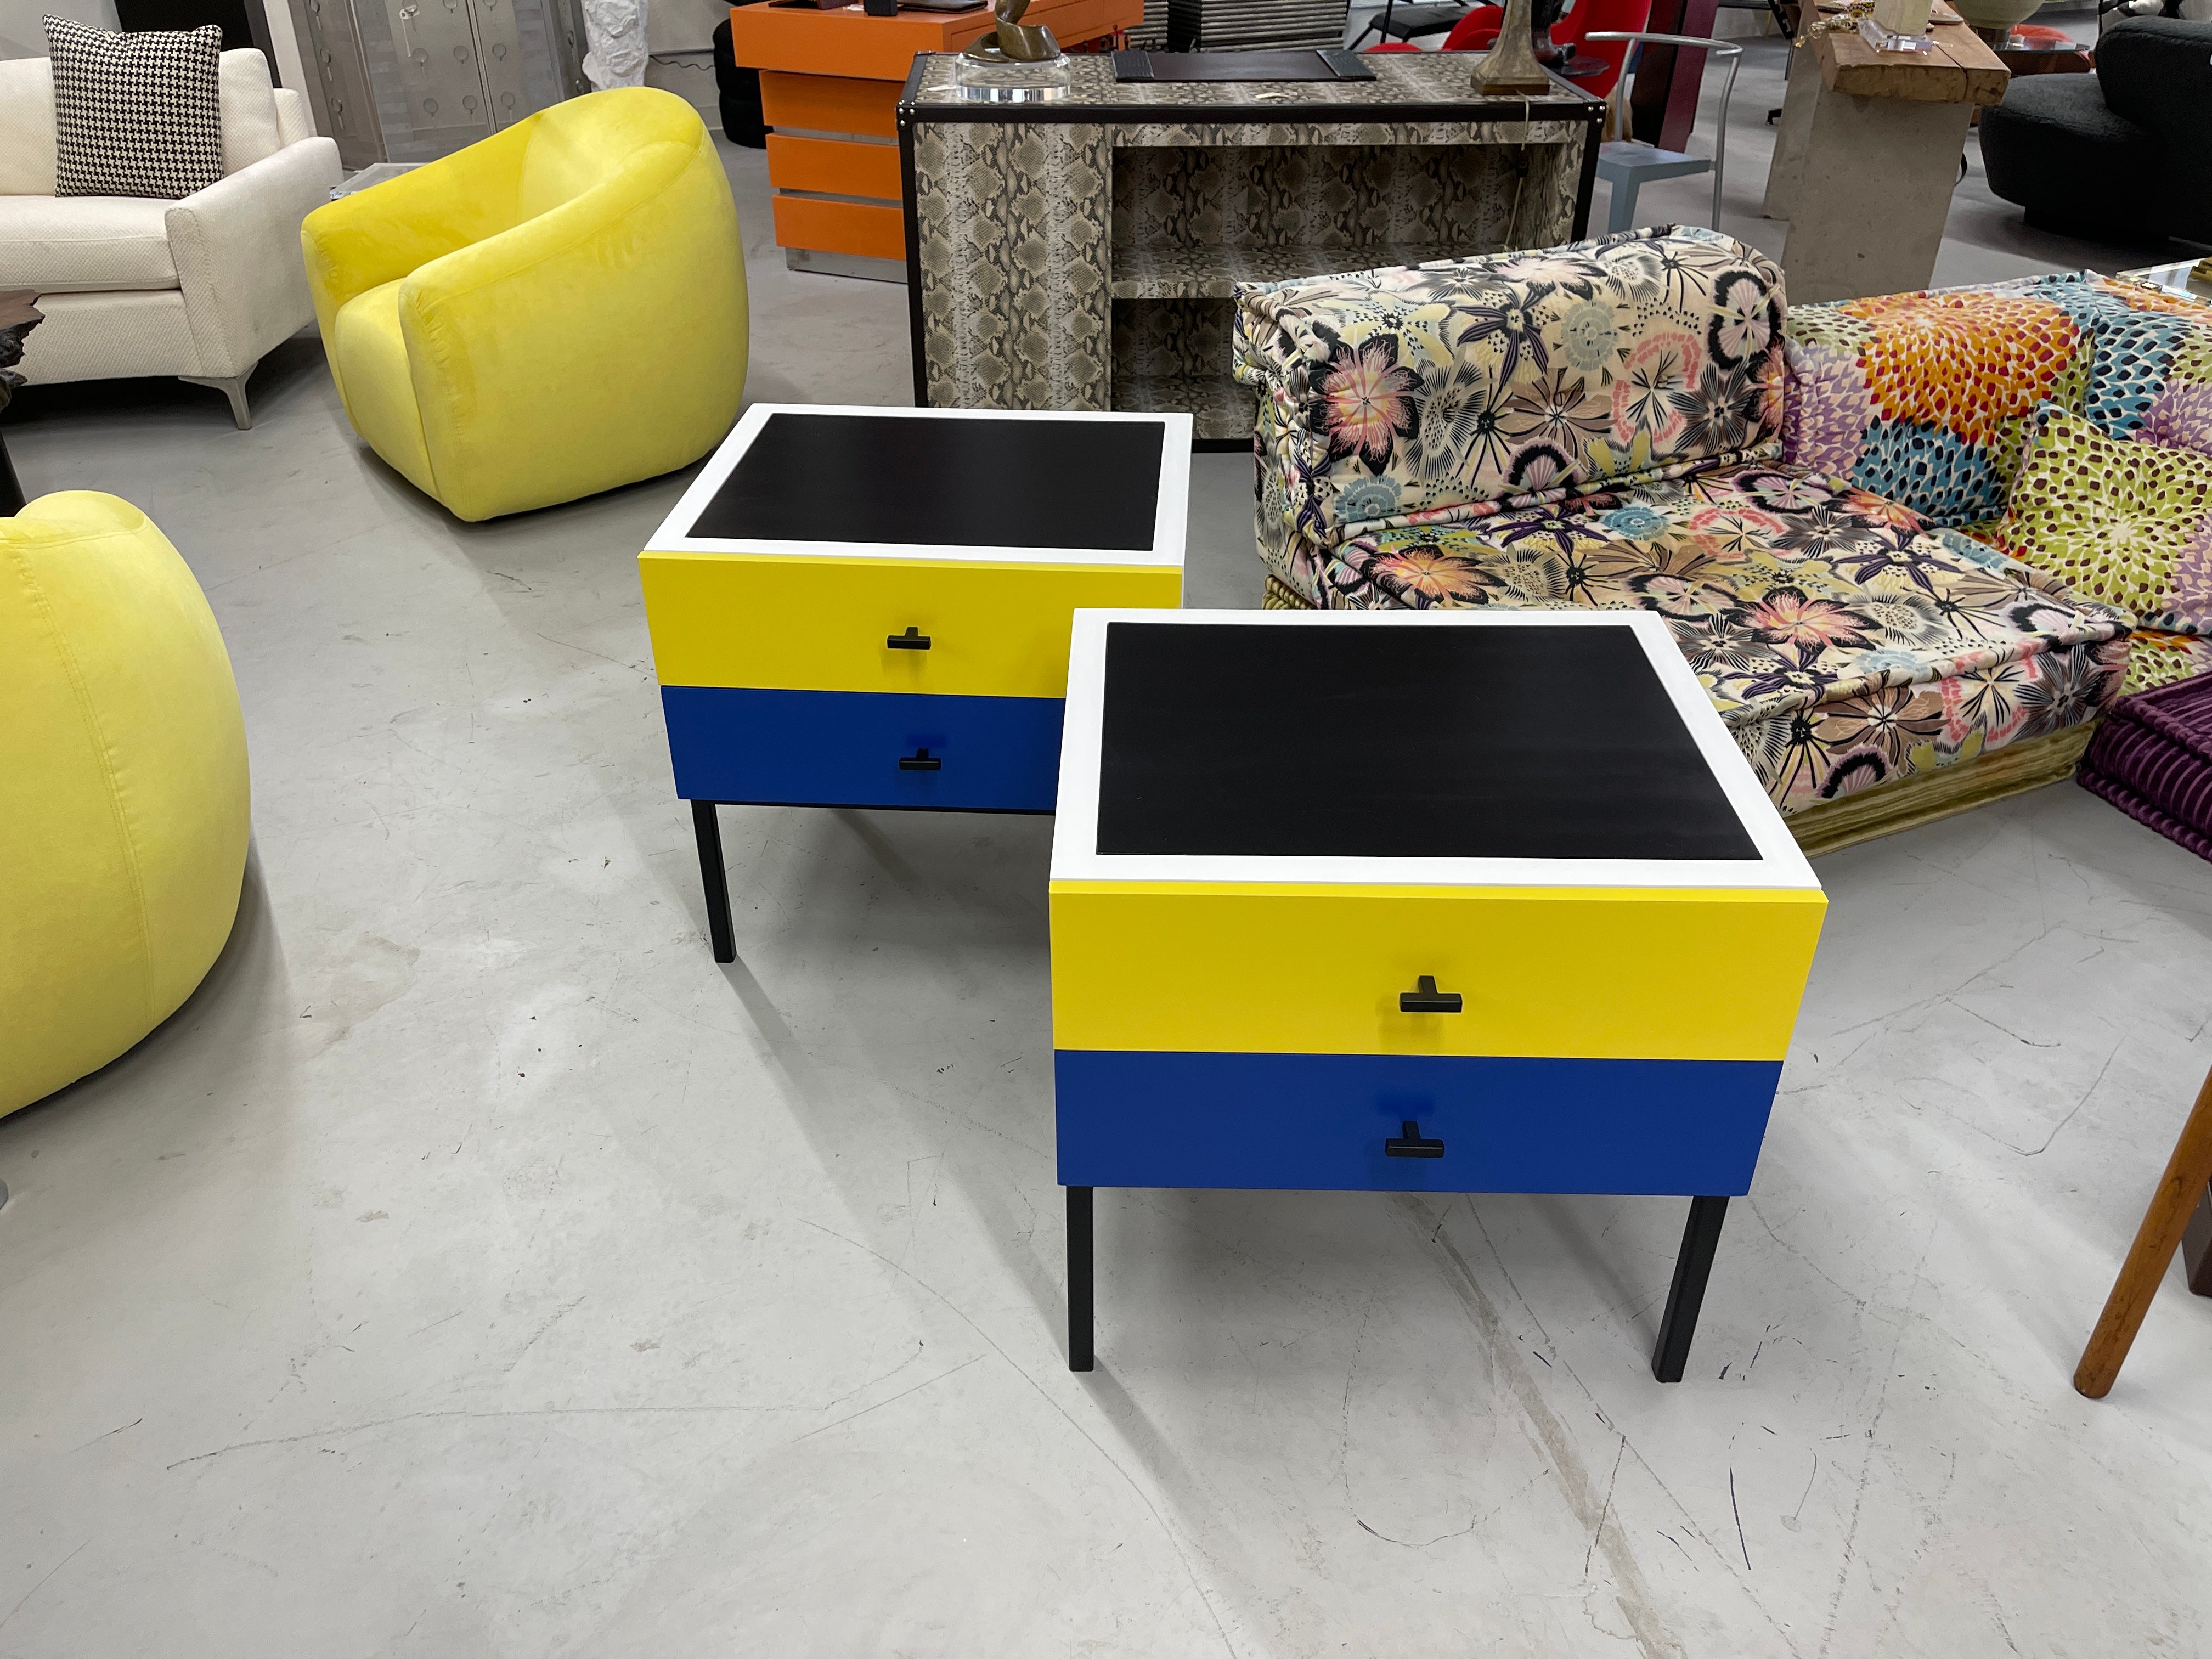 Beautiful repainted nightstands in a vibrant blue and yellow. 2 drawers each on iron legs. Inset black painted top. Nice scale and size. These nightstands are vintage pieces likely 1980's. They are 25 by 22 inches in dimension and 24 inches tall. In